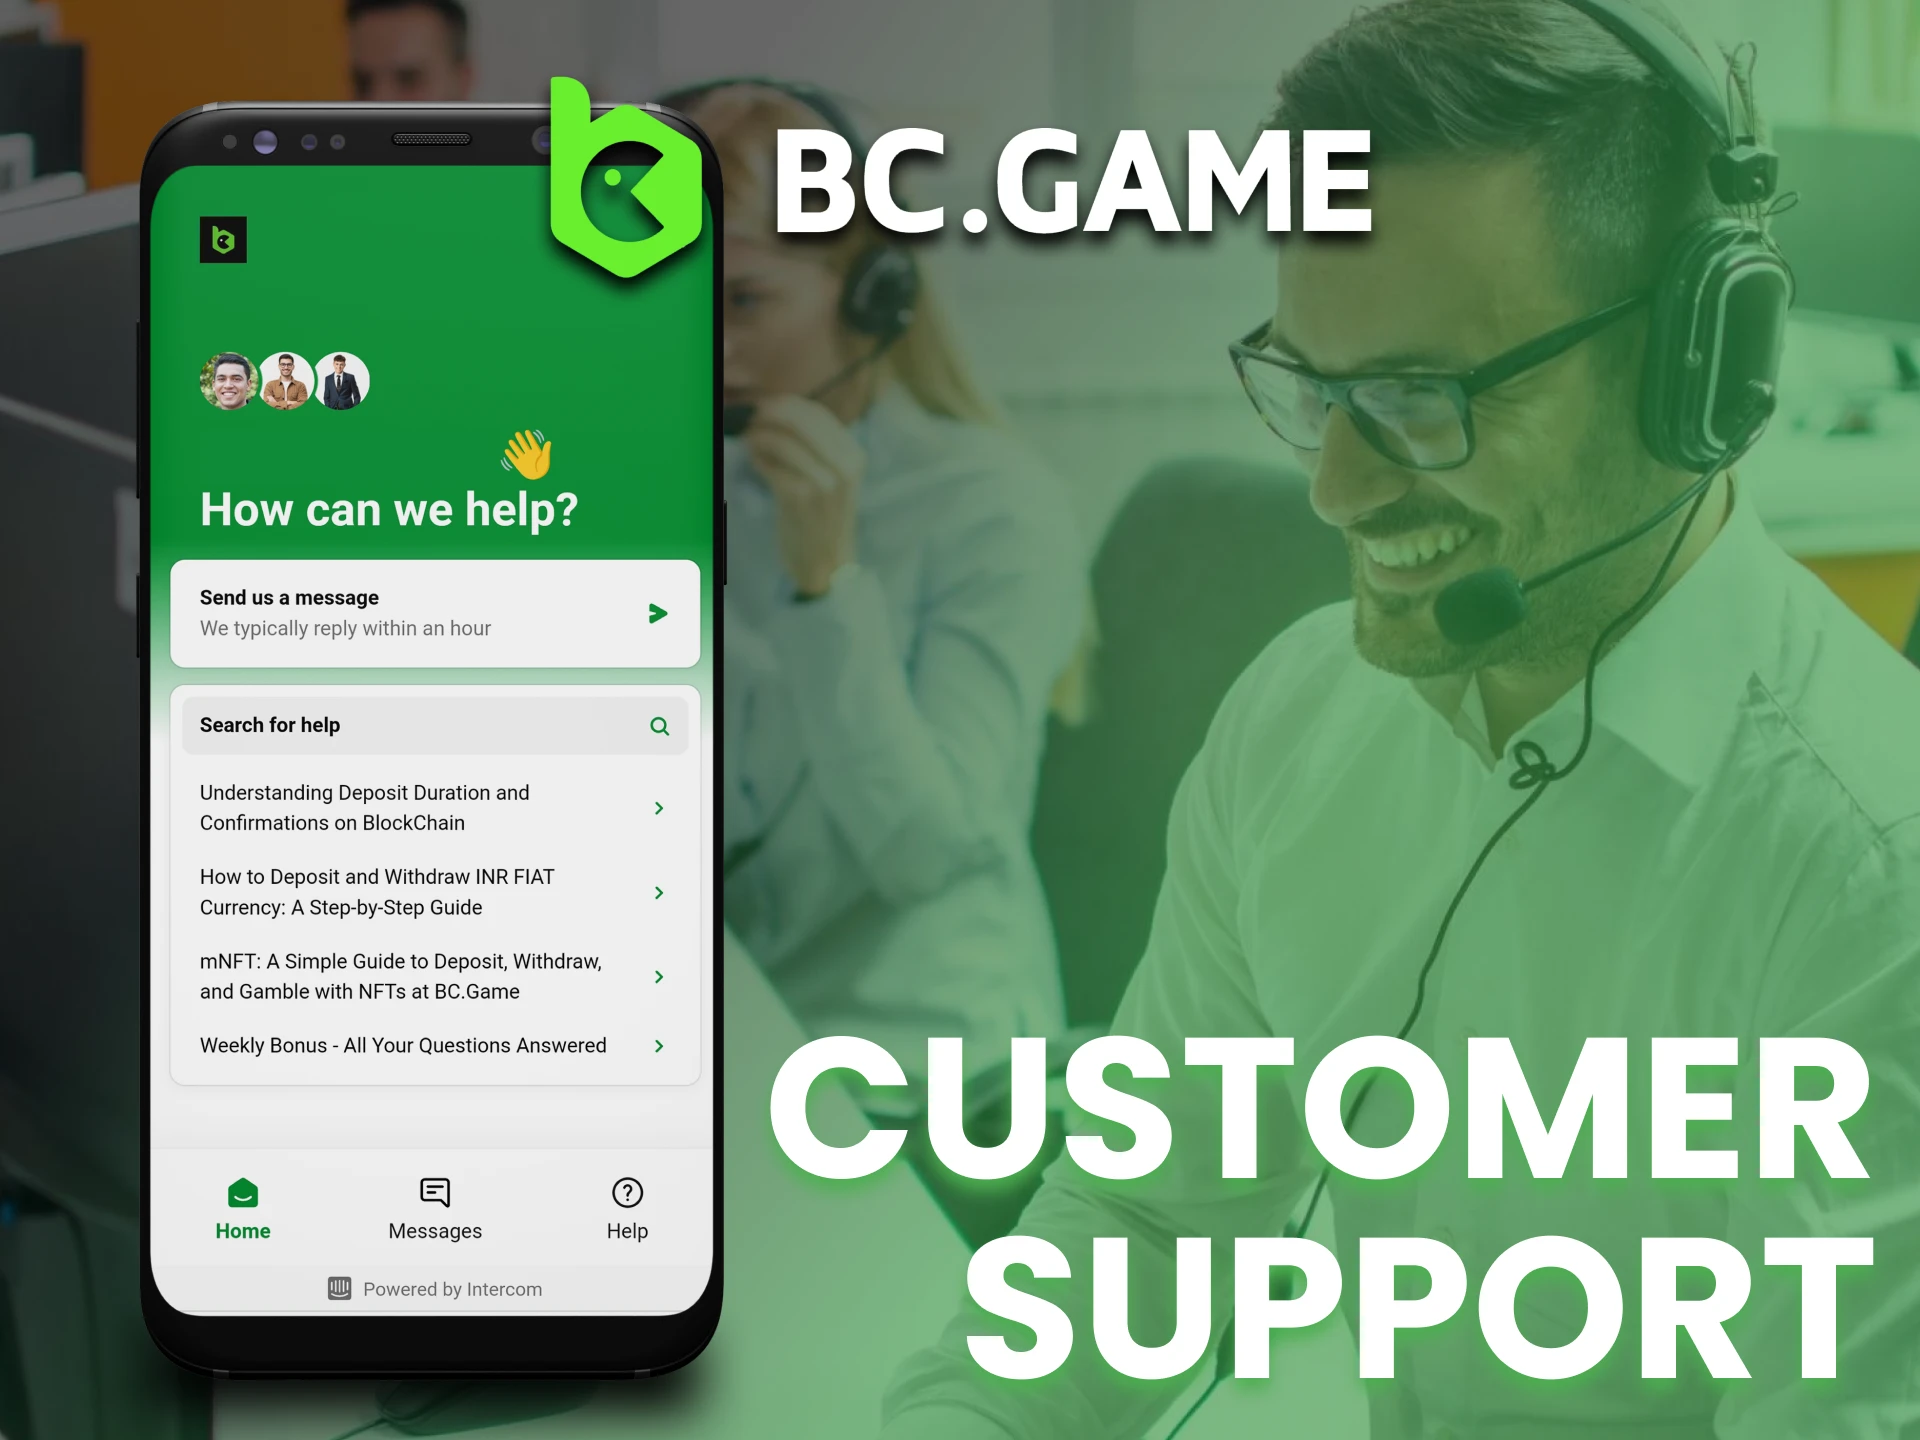 Ask any question to BC Game support.